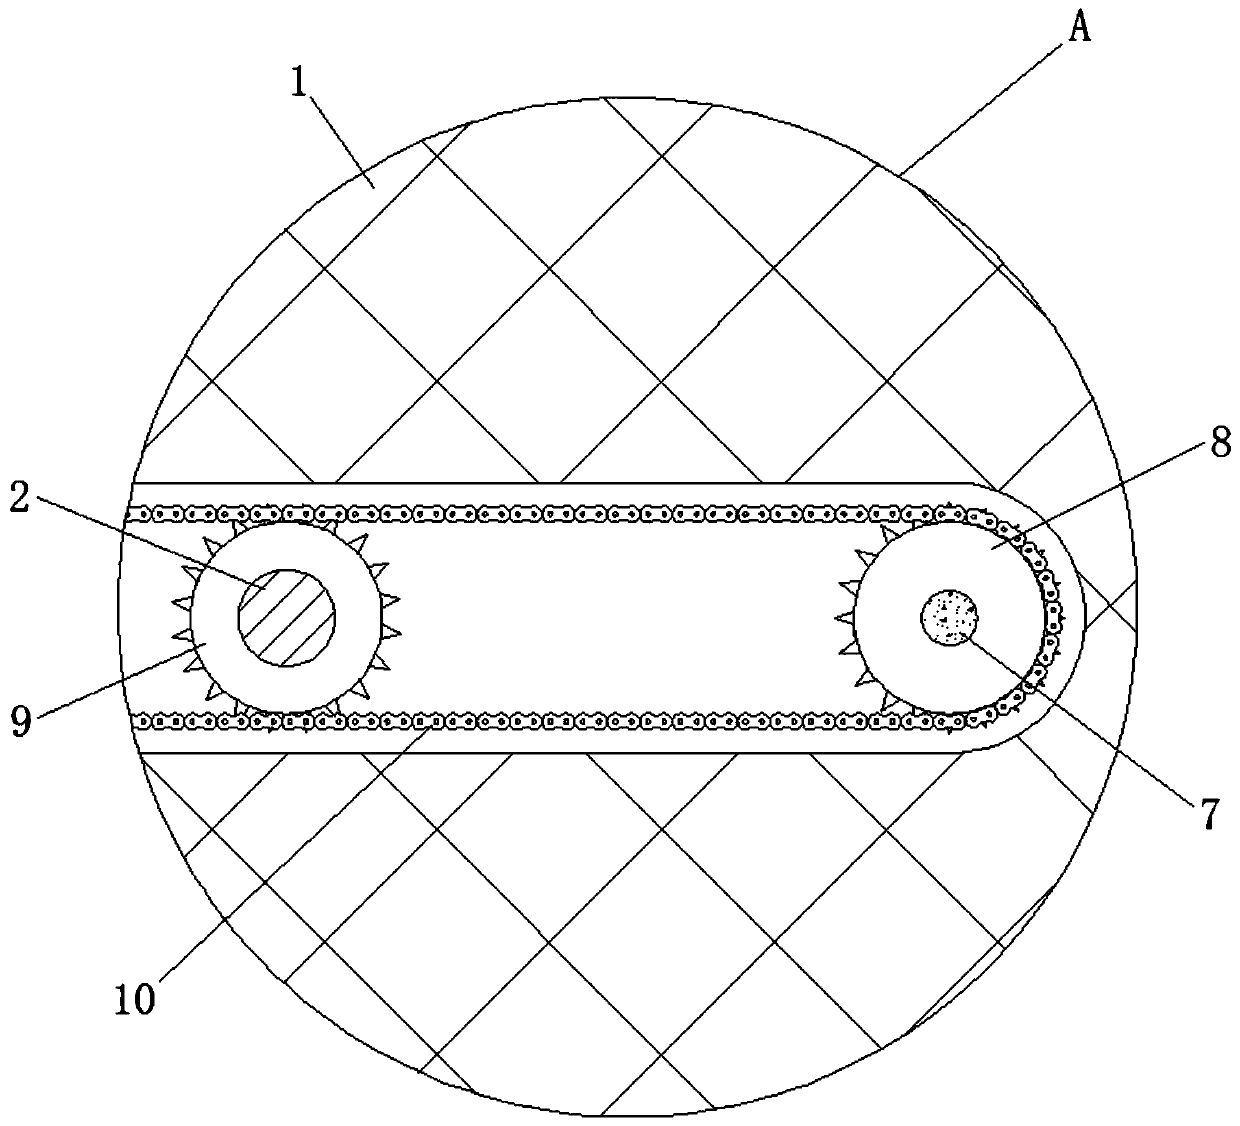 Centrifugal force-based self-regulating singeing device for textile